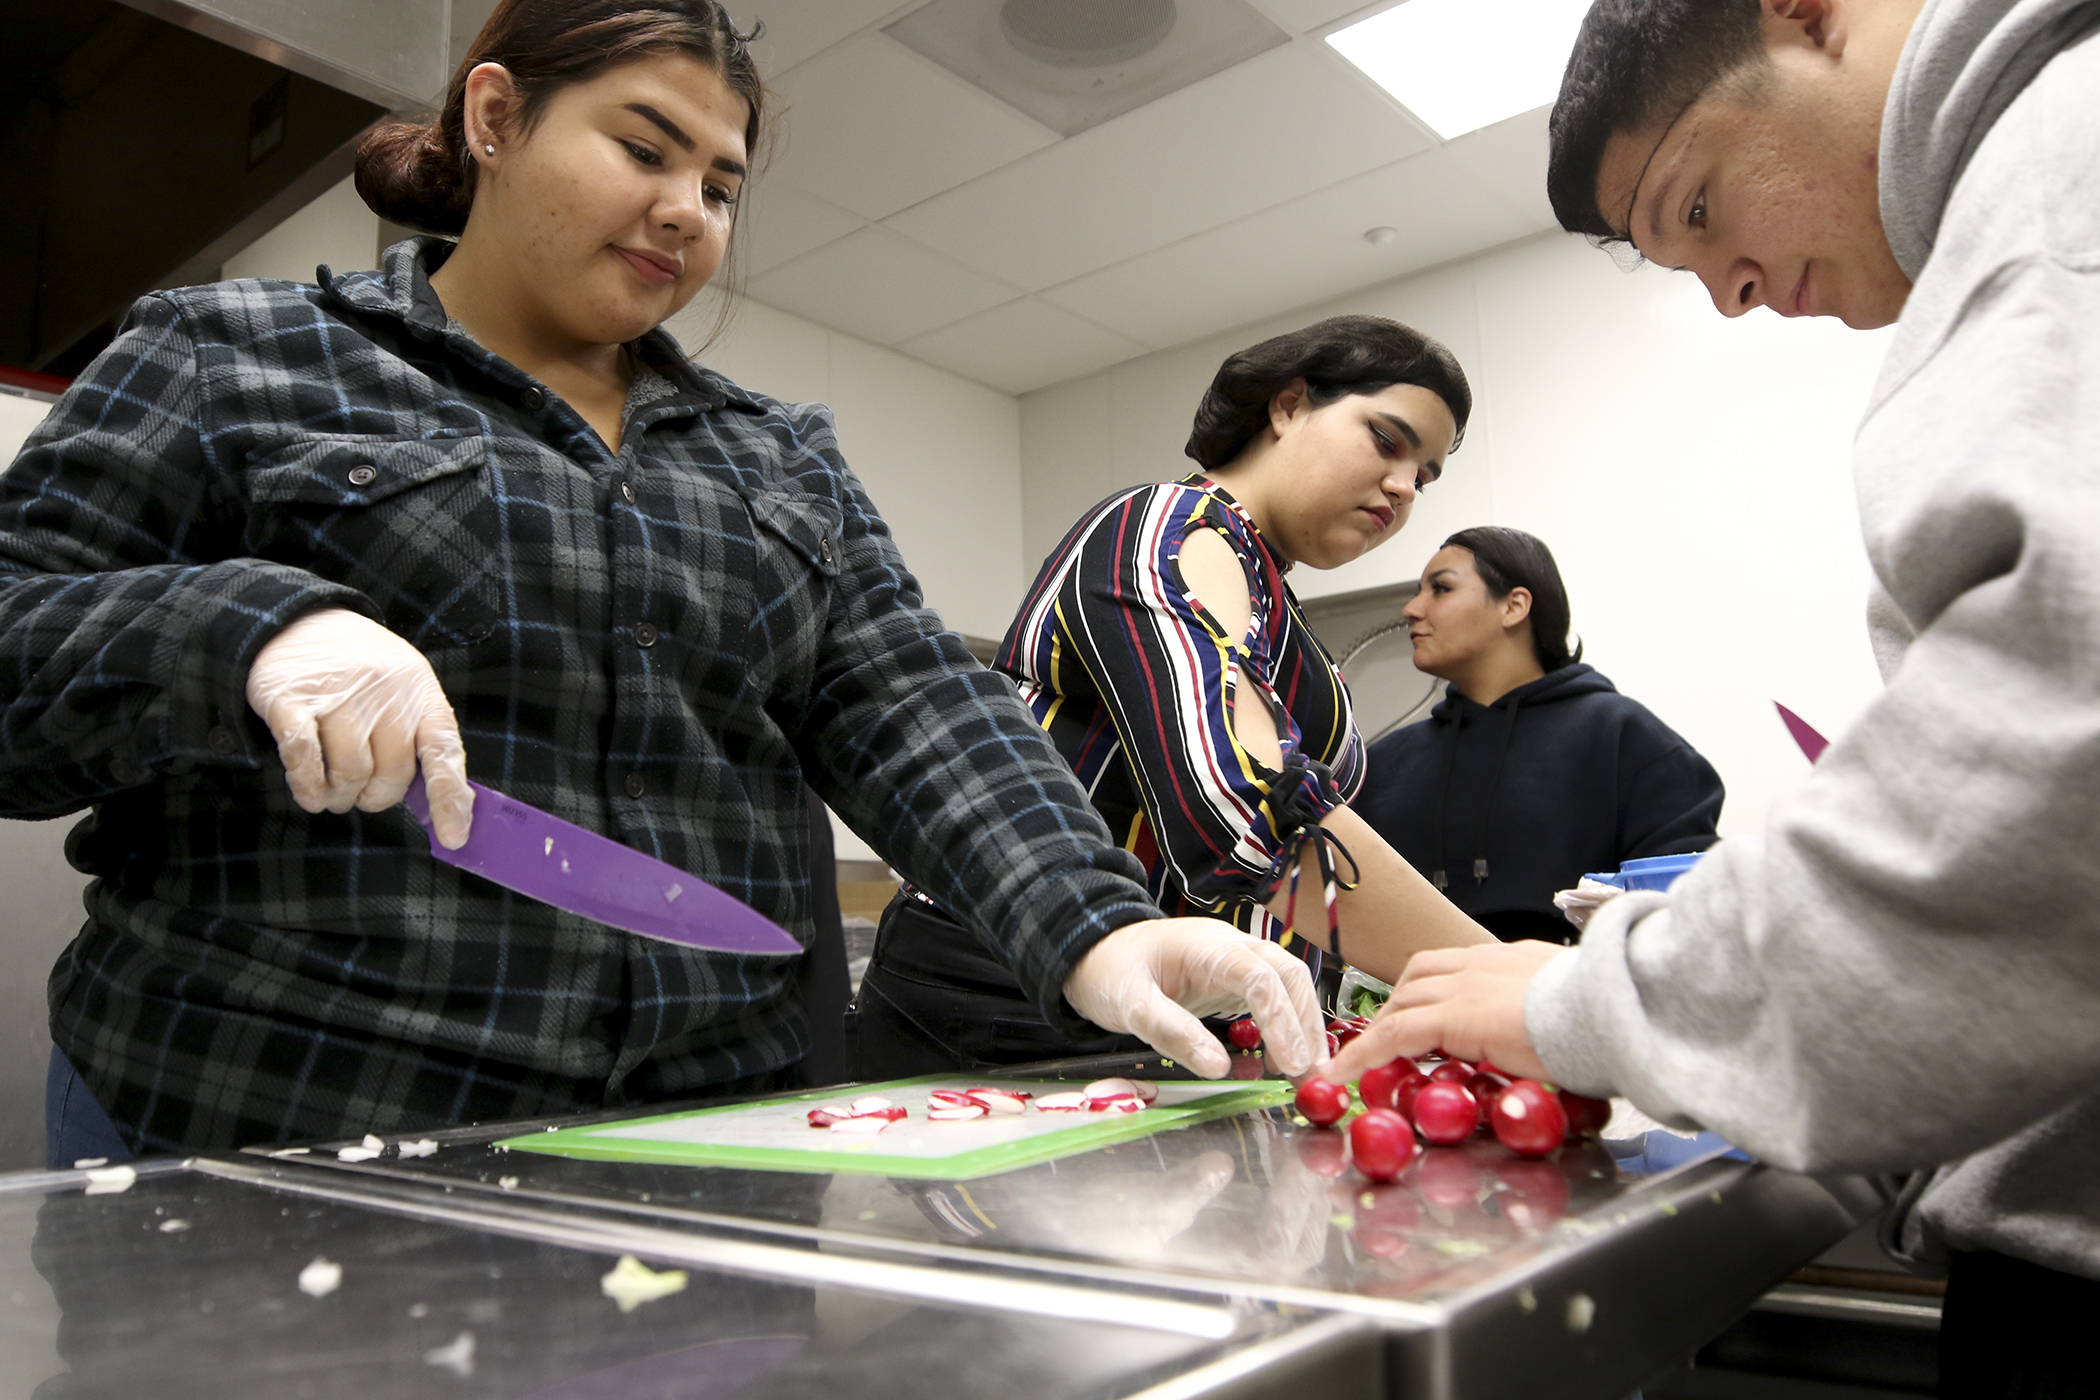 Students get taste of culinary arts  